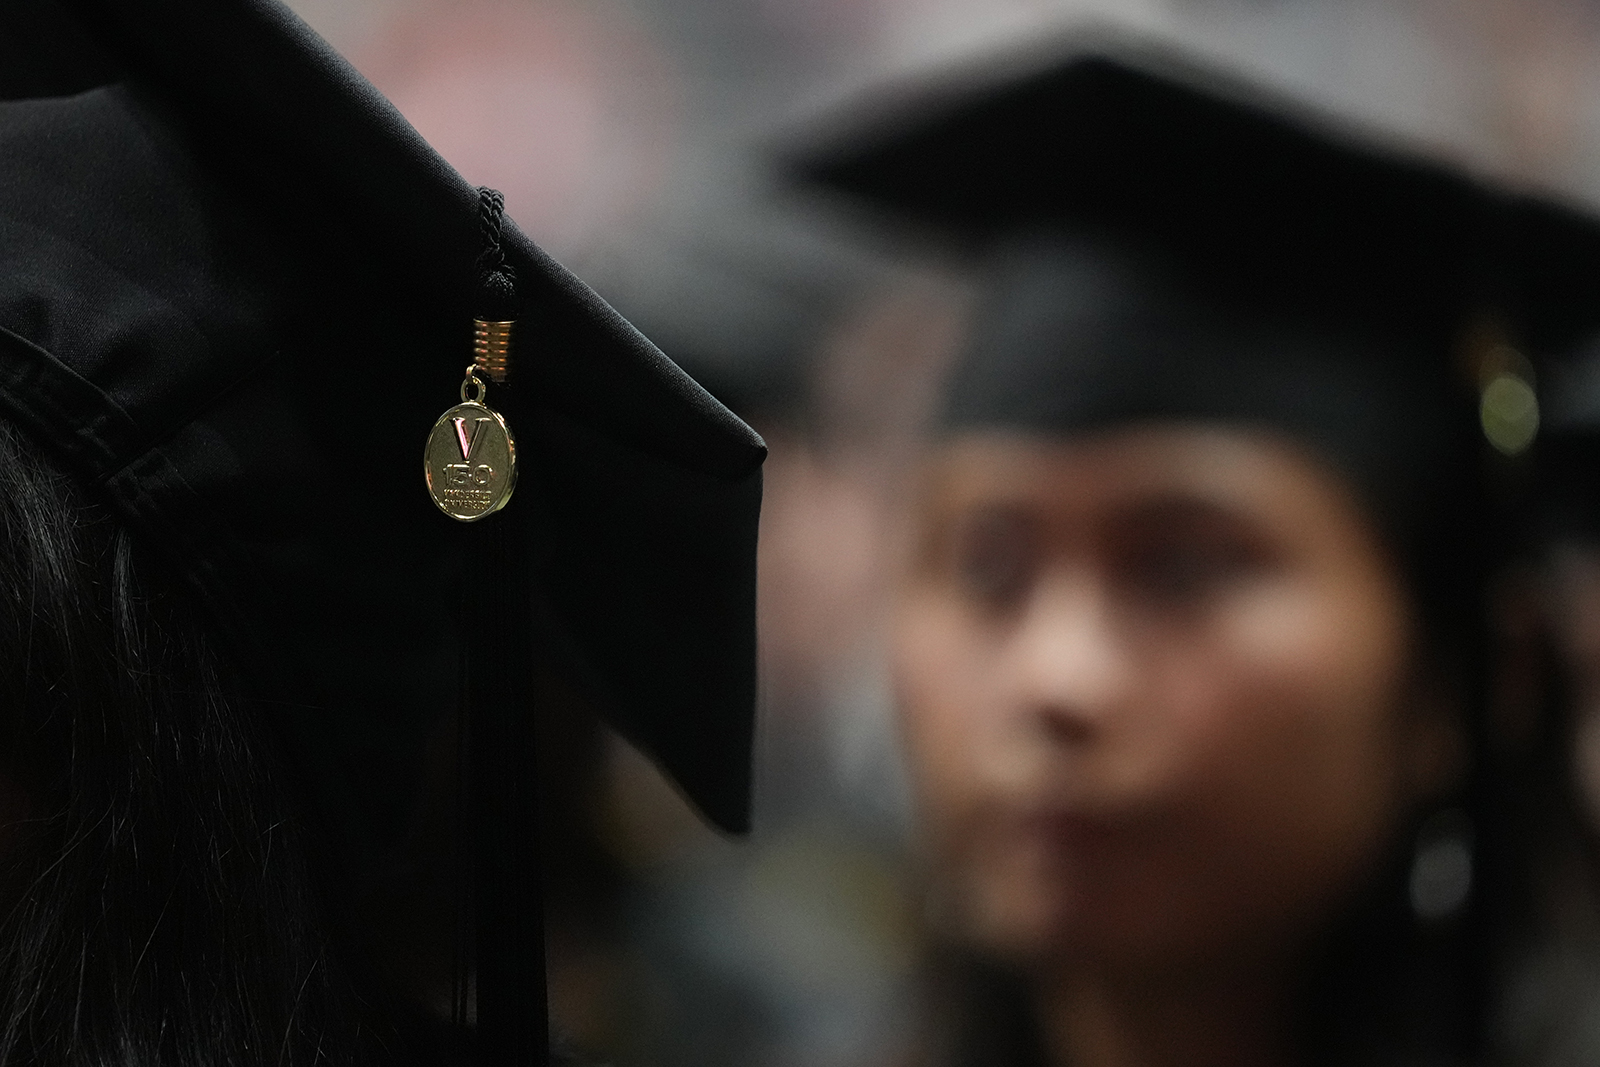 Vanderbilt University Commencement 05/12/23. Photo by Joe Howell. A close-up of the Vanderbilt Sesquicentennial charm on the tassel of a graduate's mortarboard with another graduate seen in hazy focus behind.